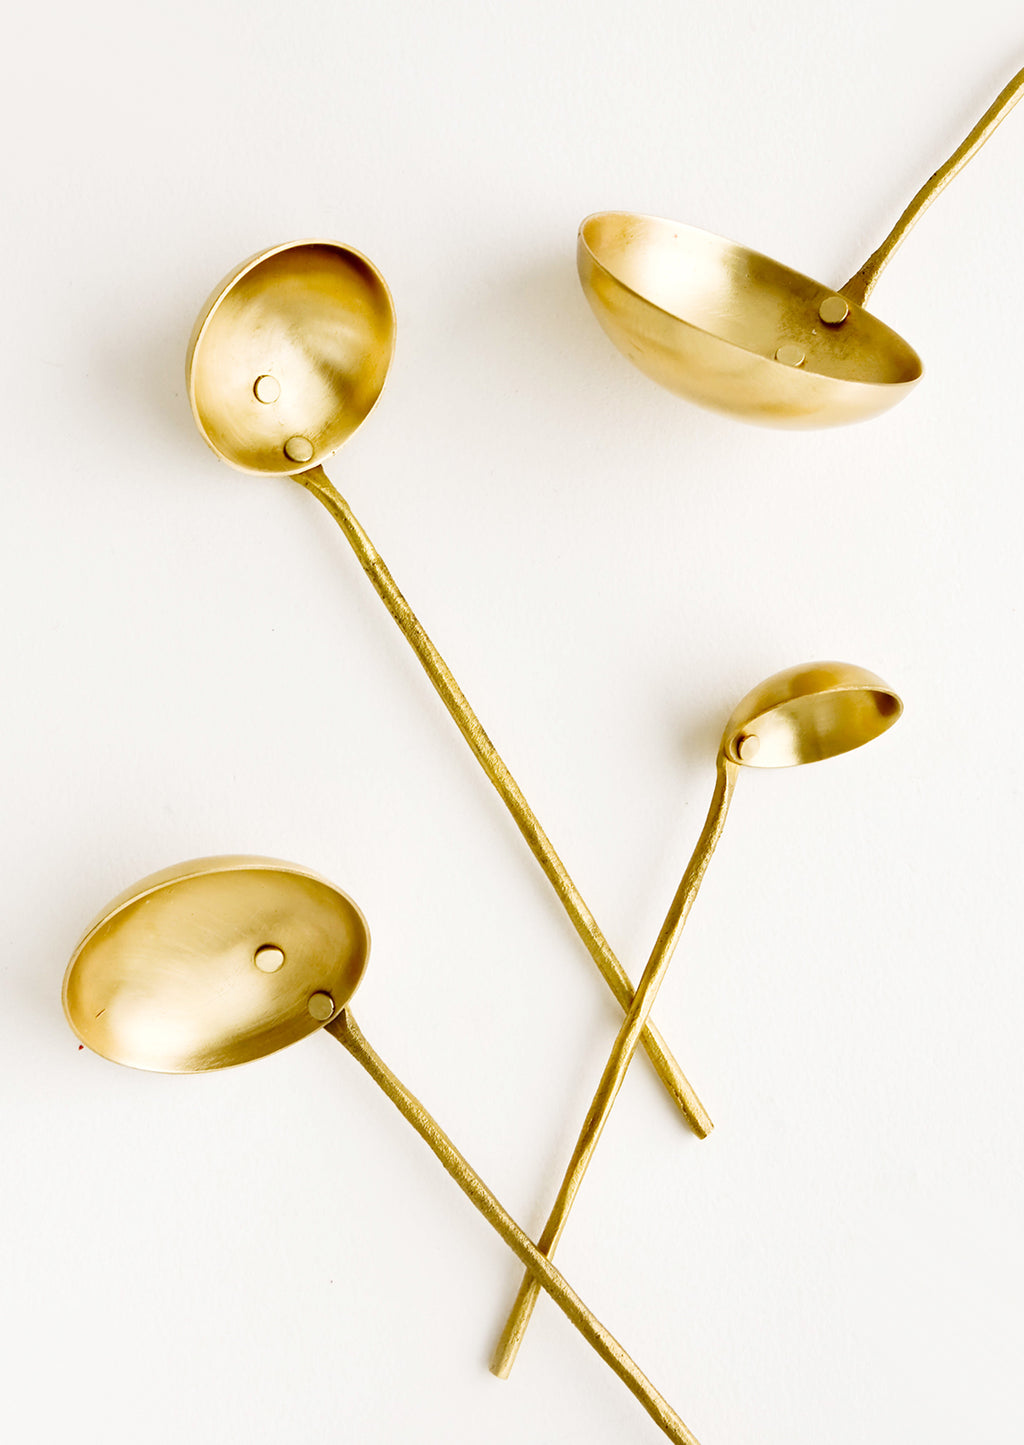 1: A set of four ladles in incremental sizes from extra small to large, crafted in solid brass with skinny handles